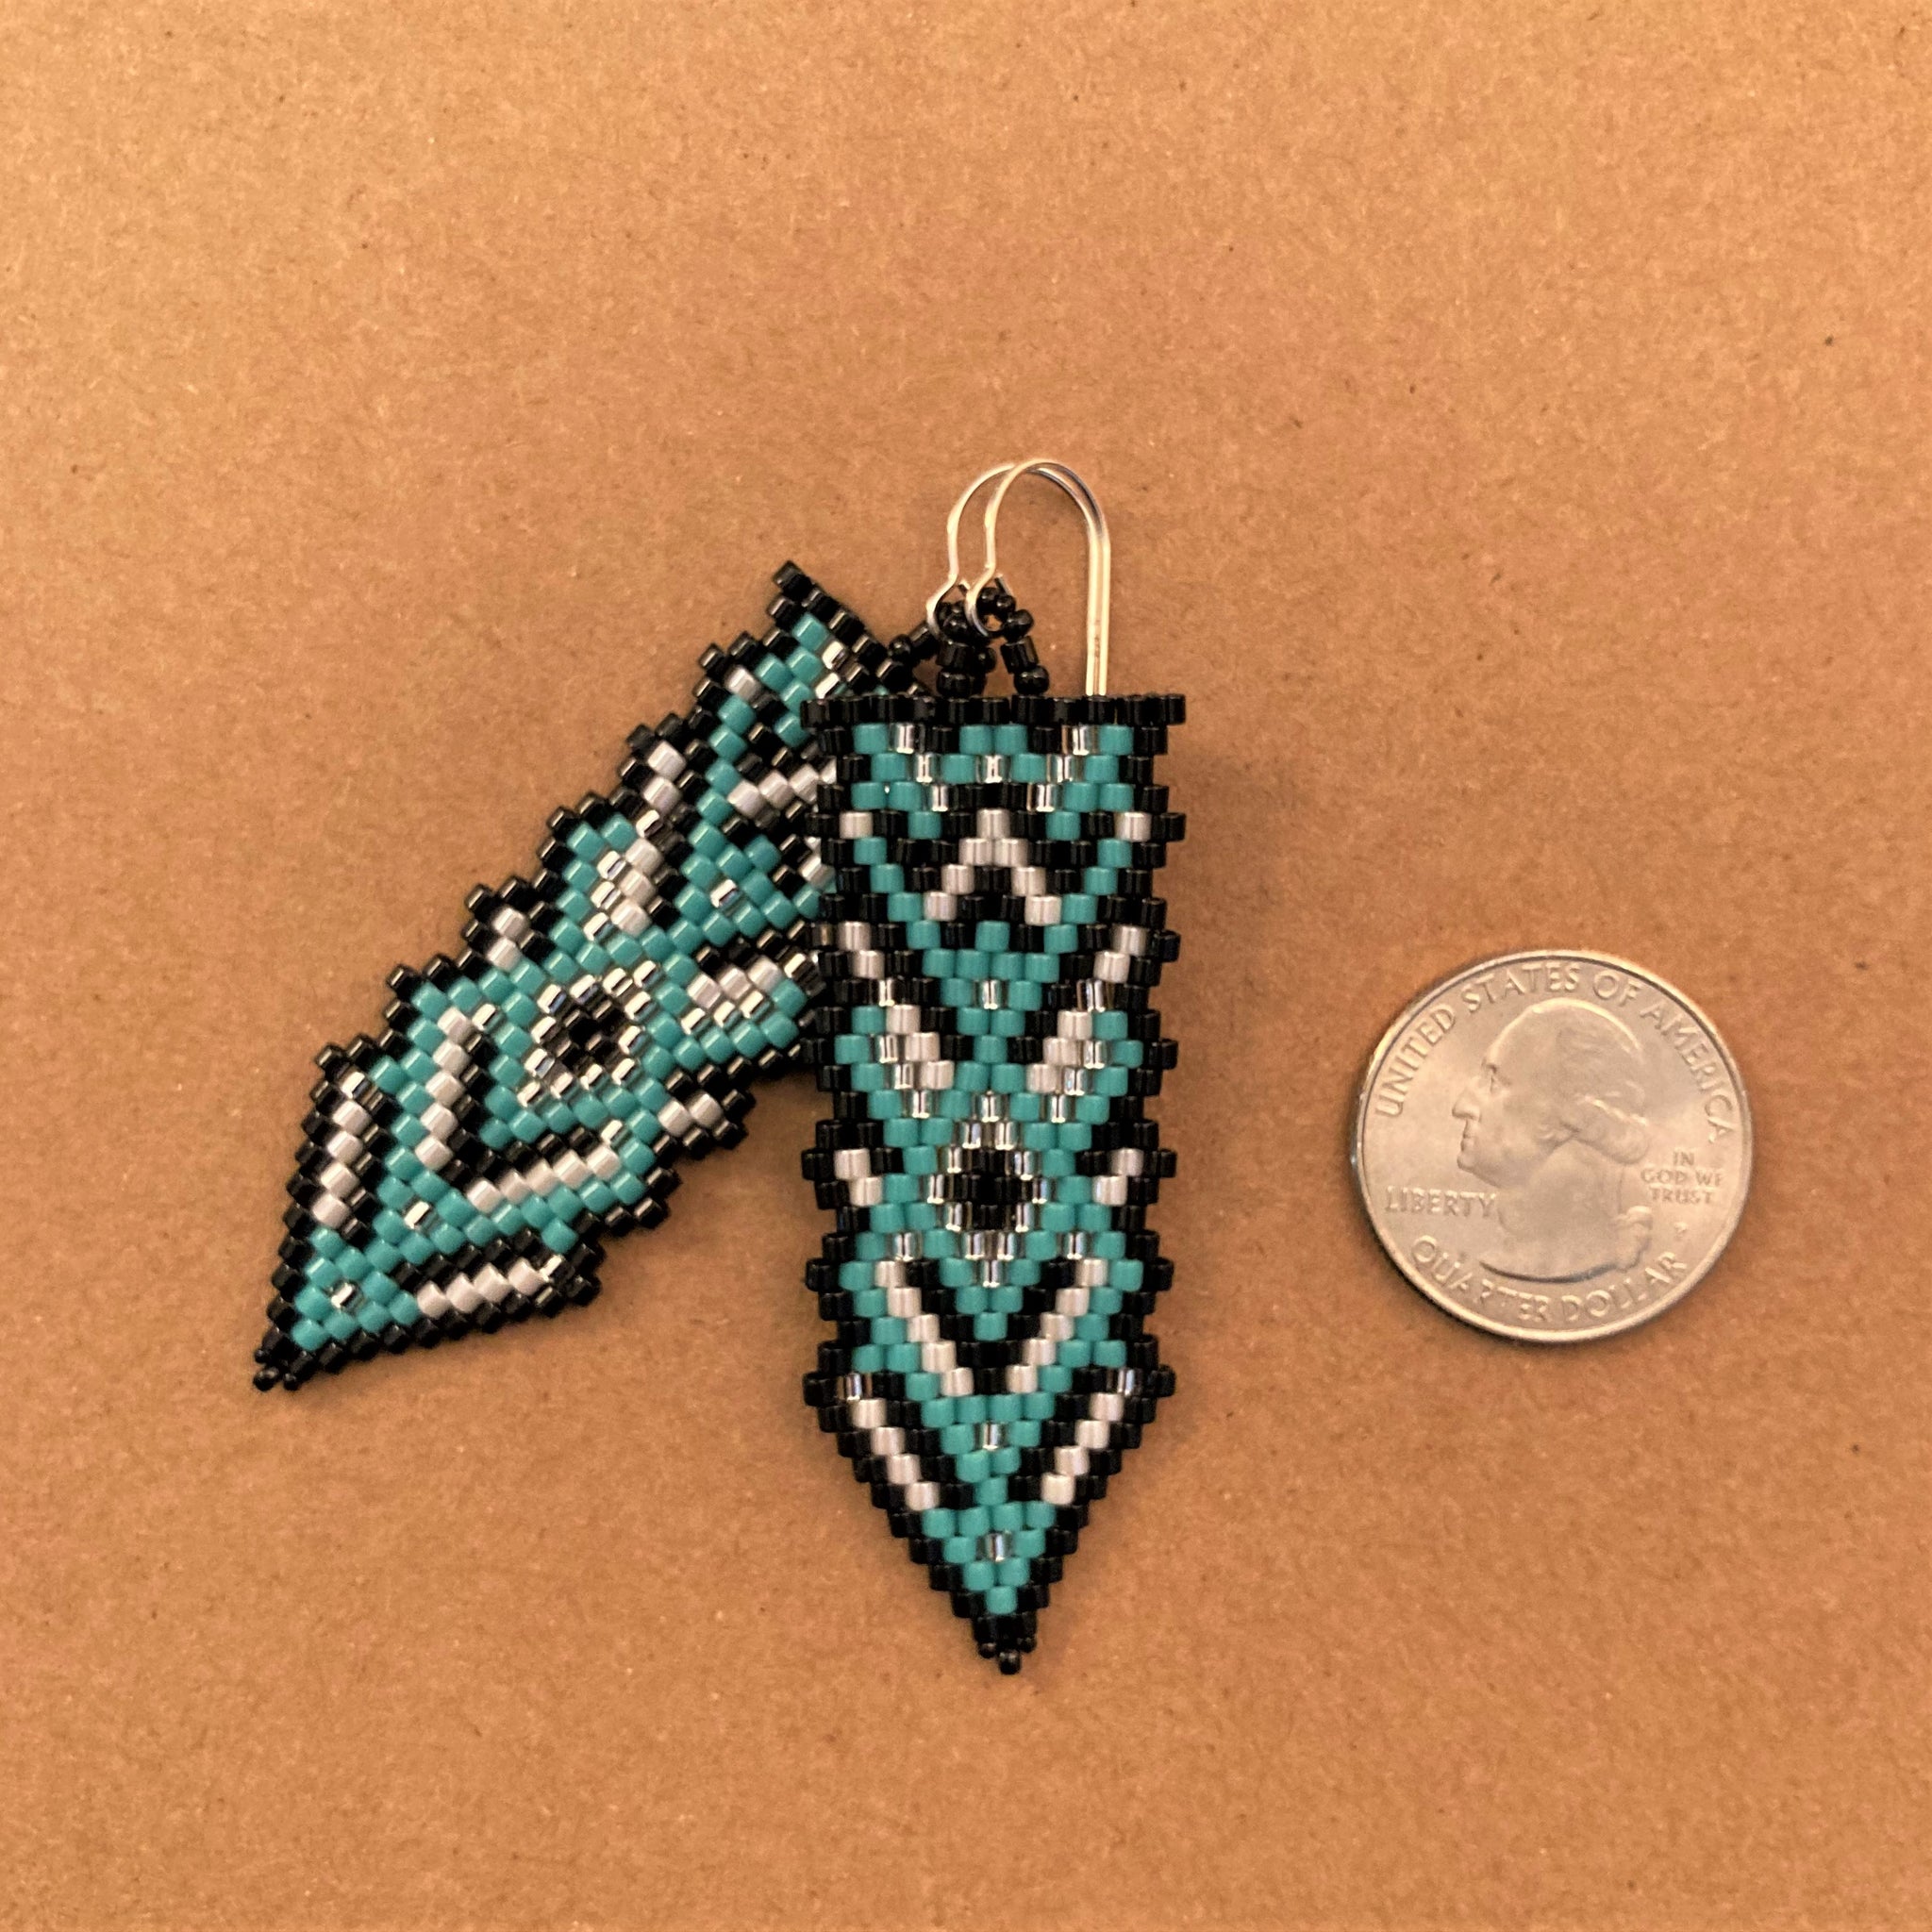 Long Beaded Arrow Earrings in Turquoise Black White and Silver